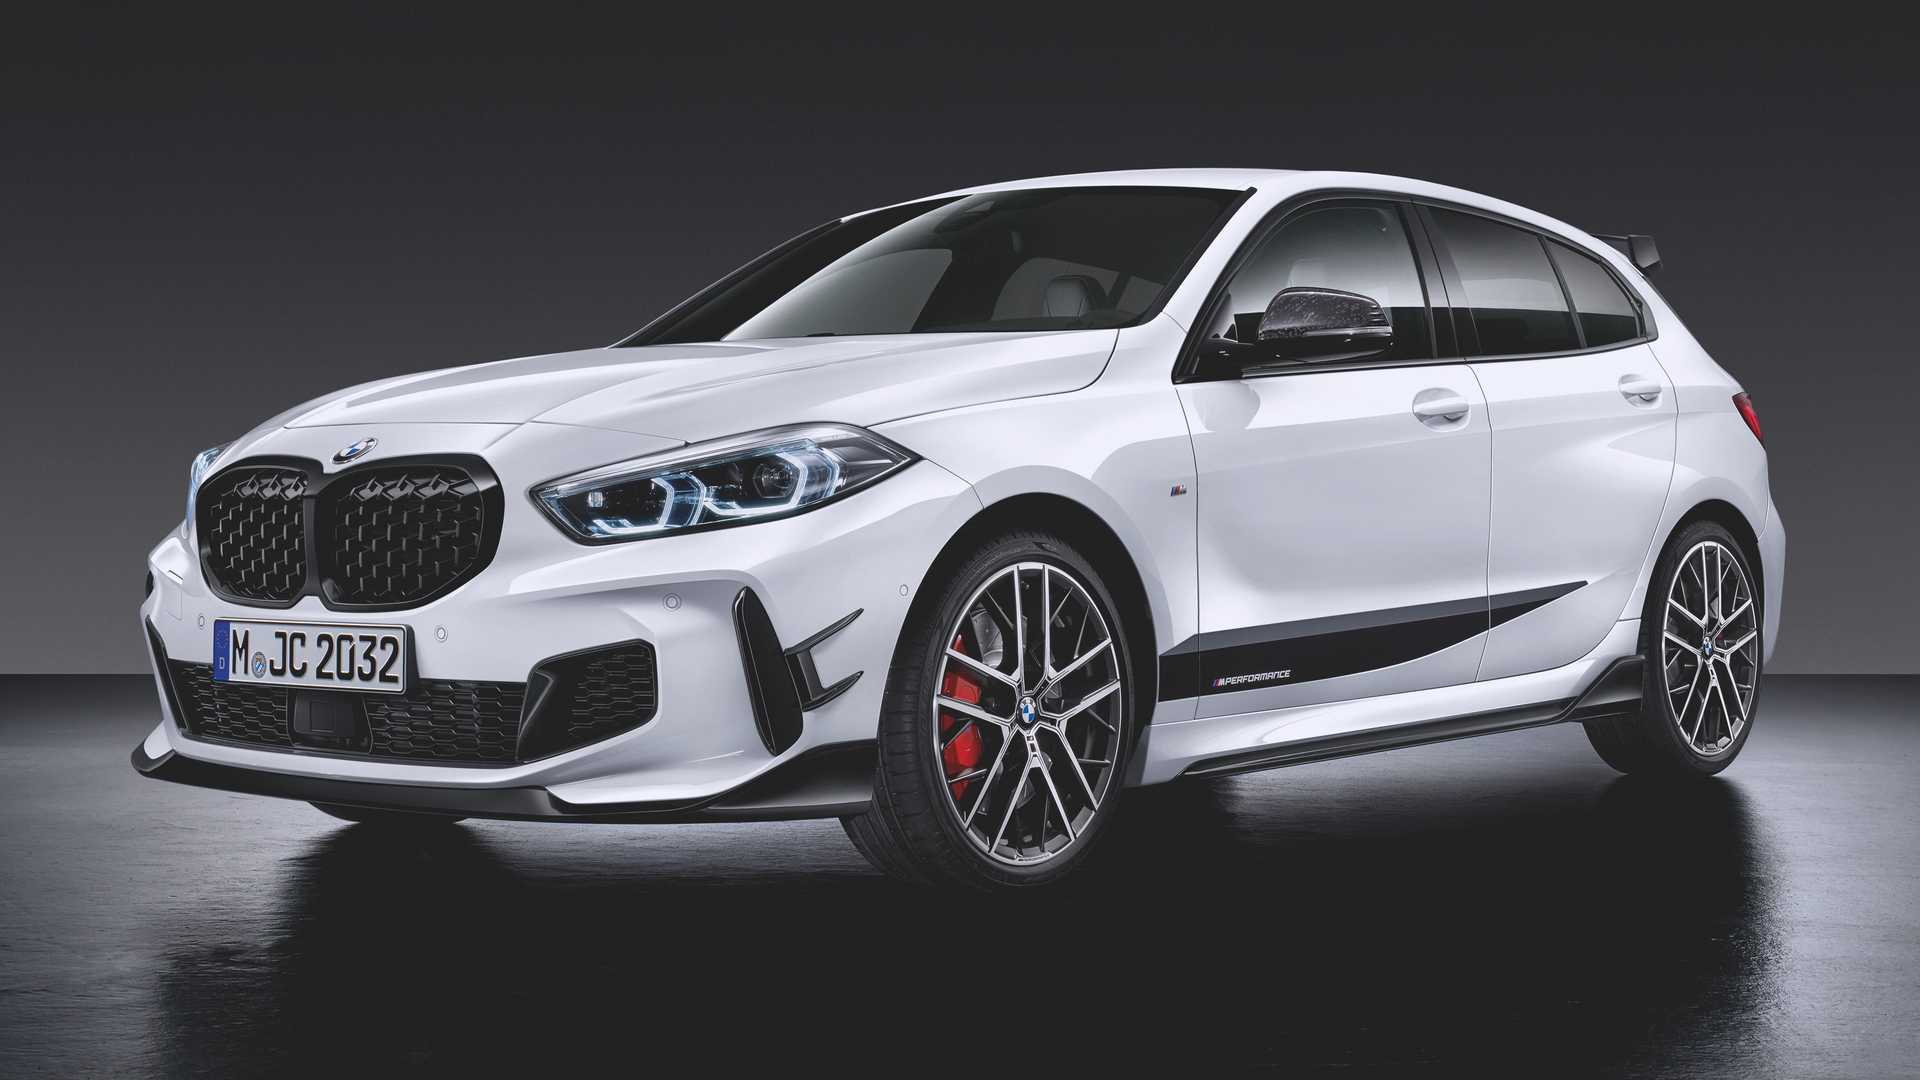 All-new BMW 1 Series and M135i 2020 revealed